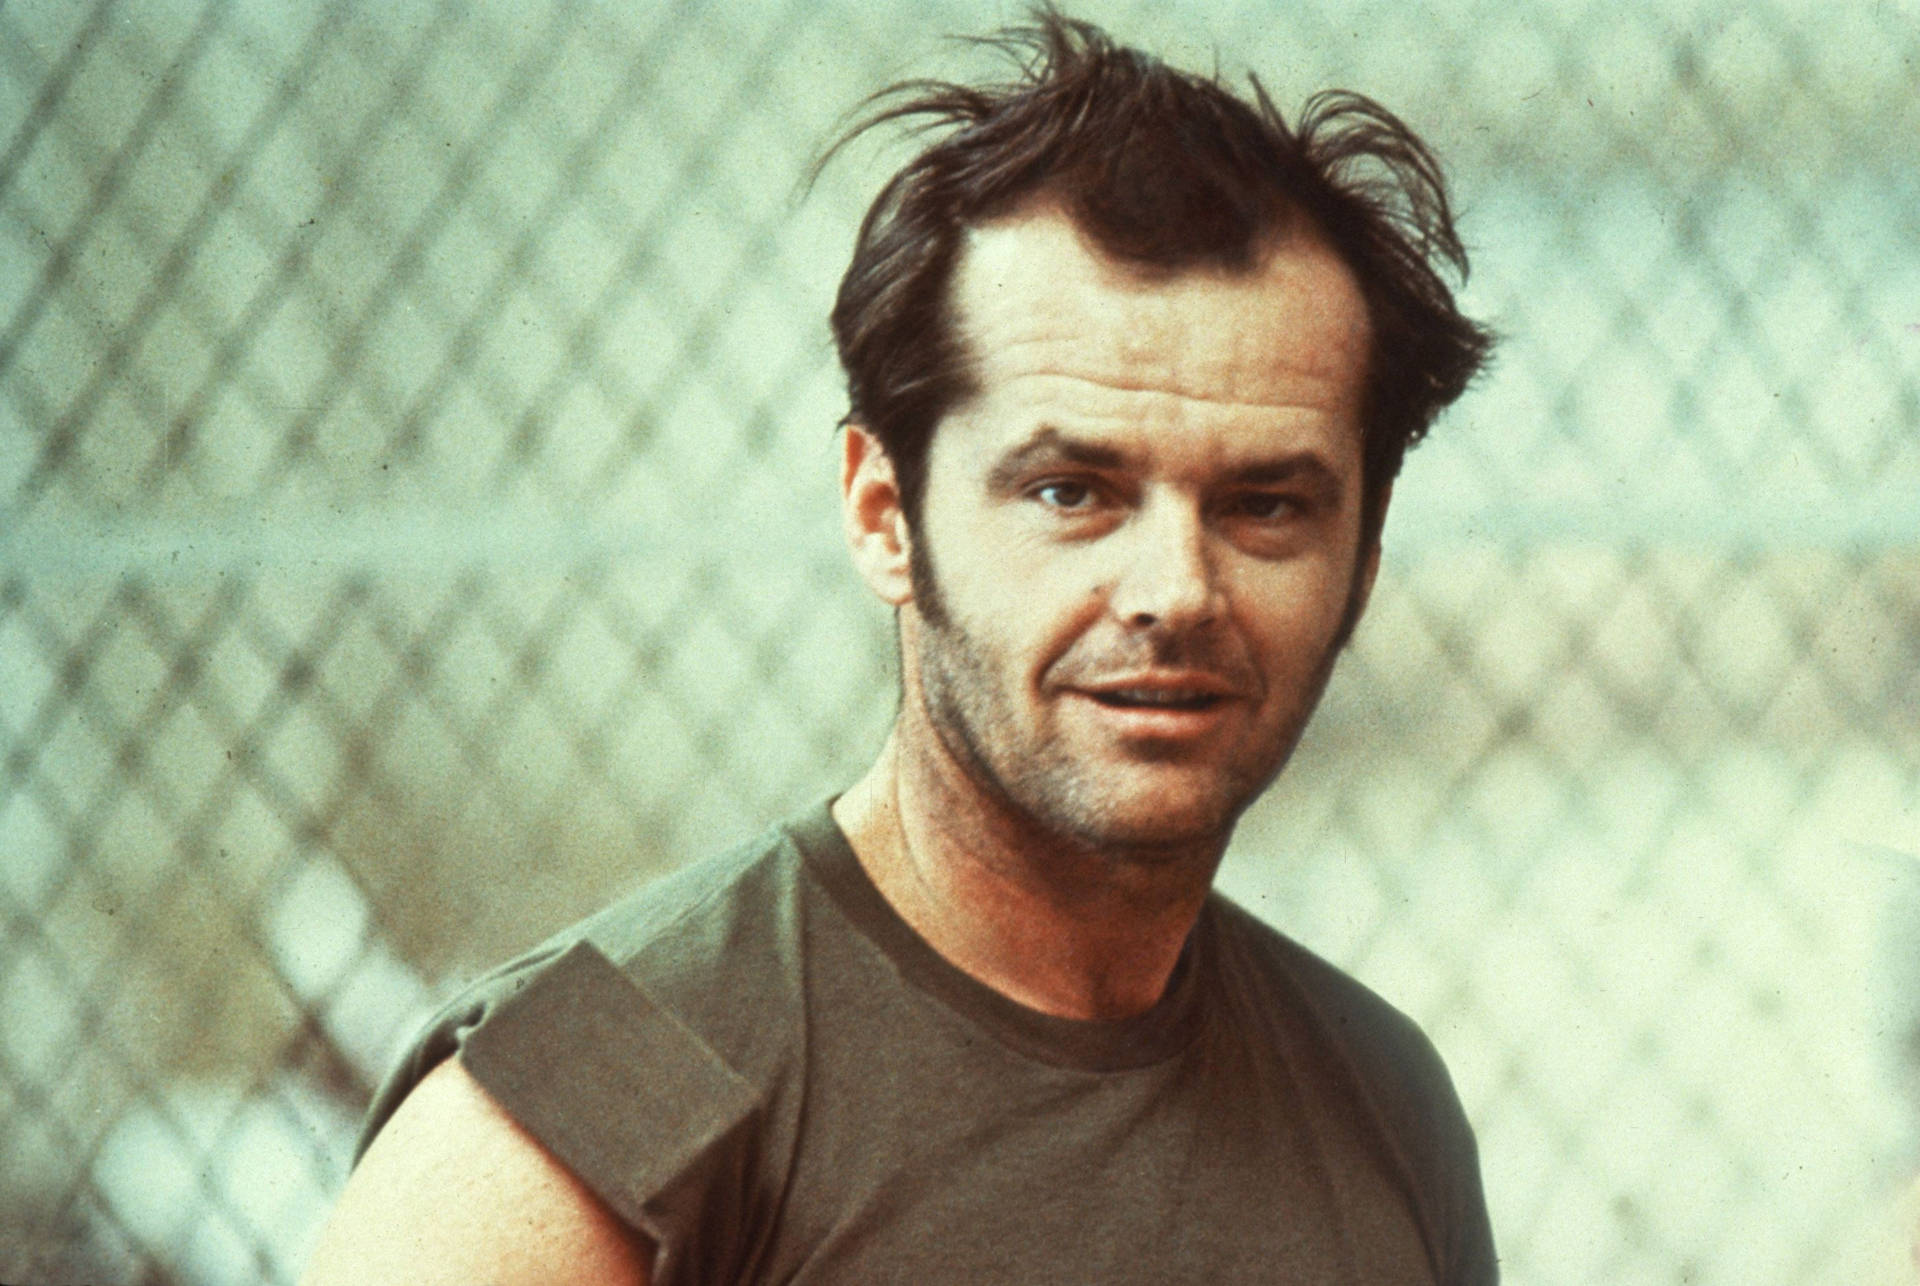 Jack Nicholson In One Flew Over The Cuckoo's Nest